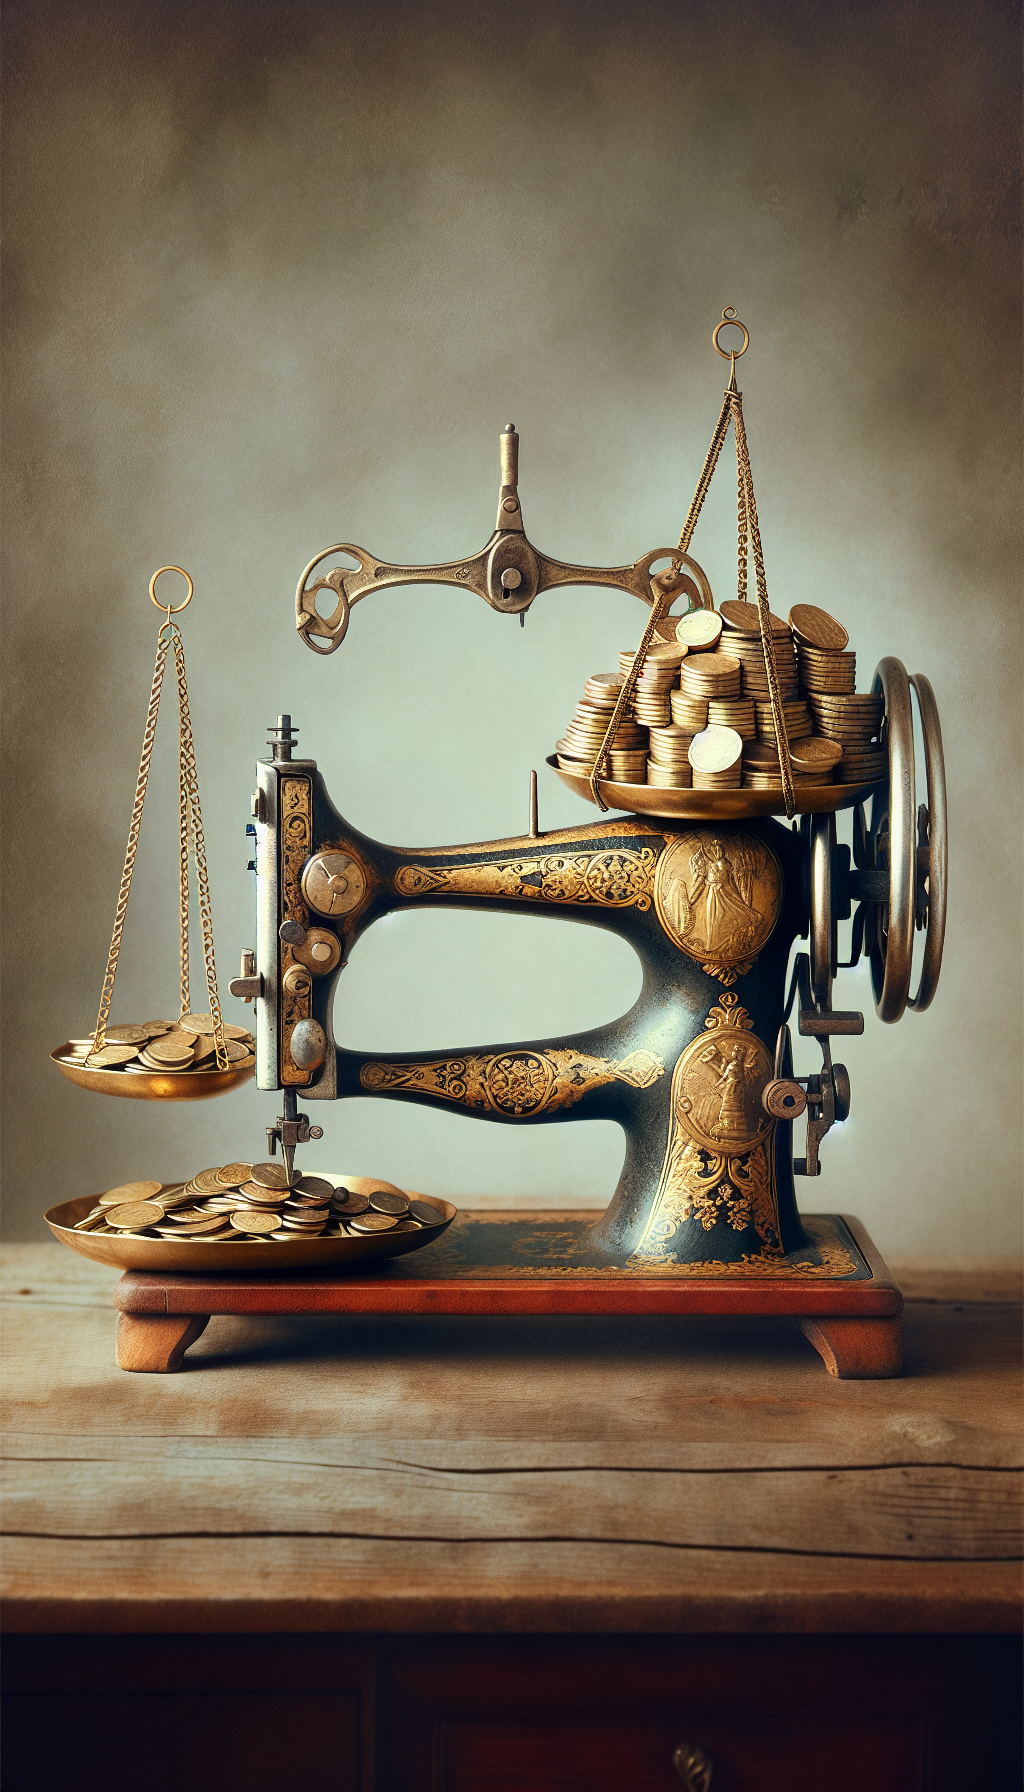 A vintage sewing machine sits on top of a jeweler’s balance scale, with one side holding a pile of golden coins. The ornate details of the machine contrast with the shiny simplicity of the coins, symbolizing the machine's intricate value. Soft watercolor tones blend the two eras, hinting at the balance between historical charm and monetary worth.